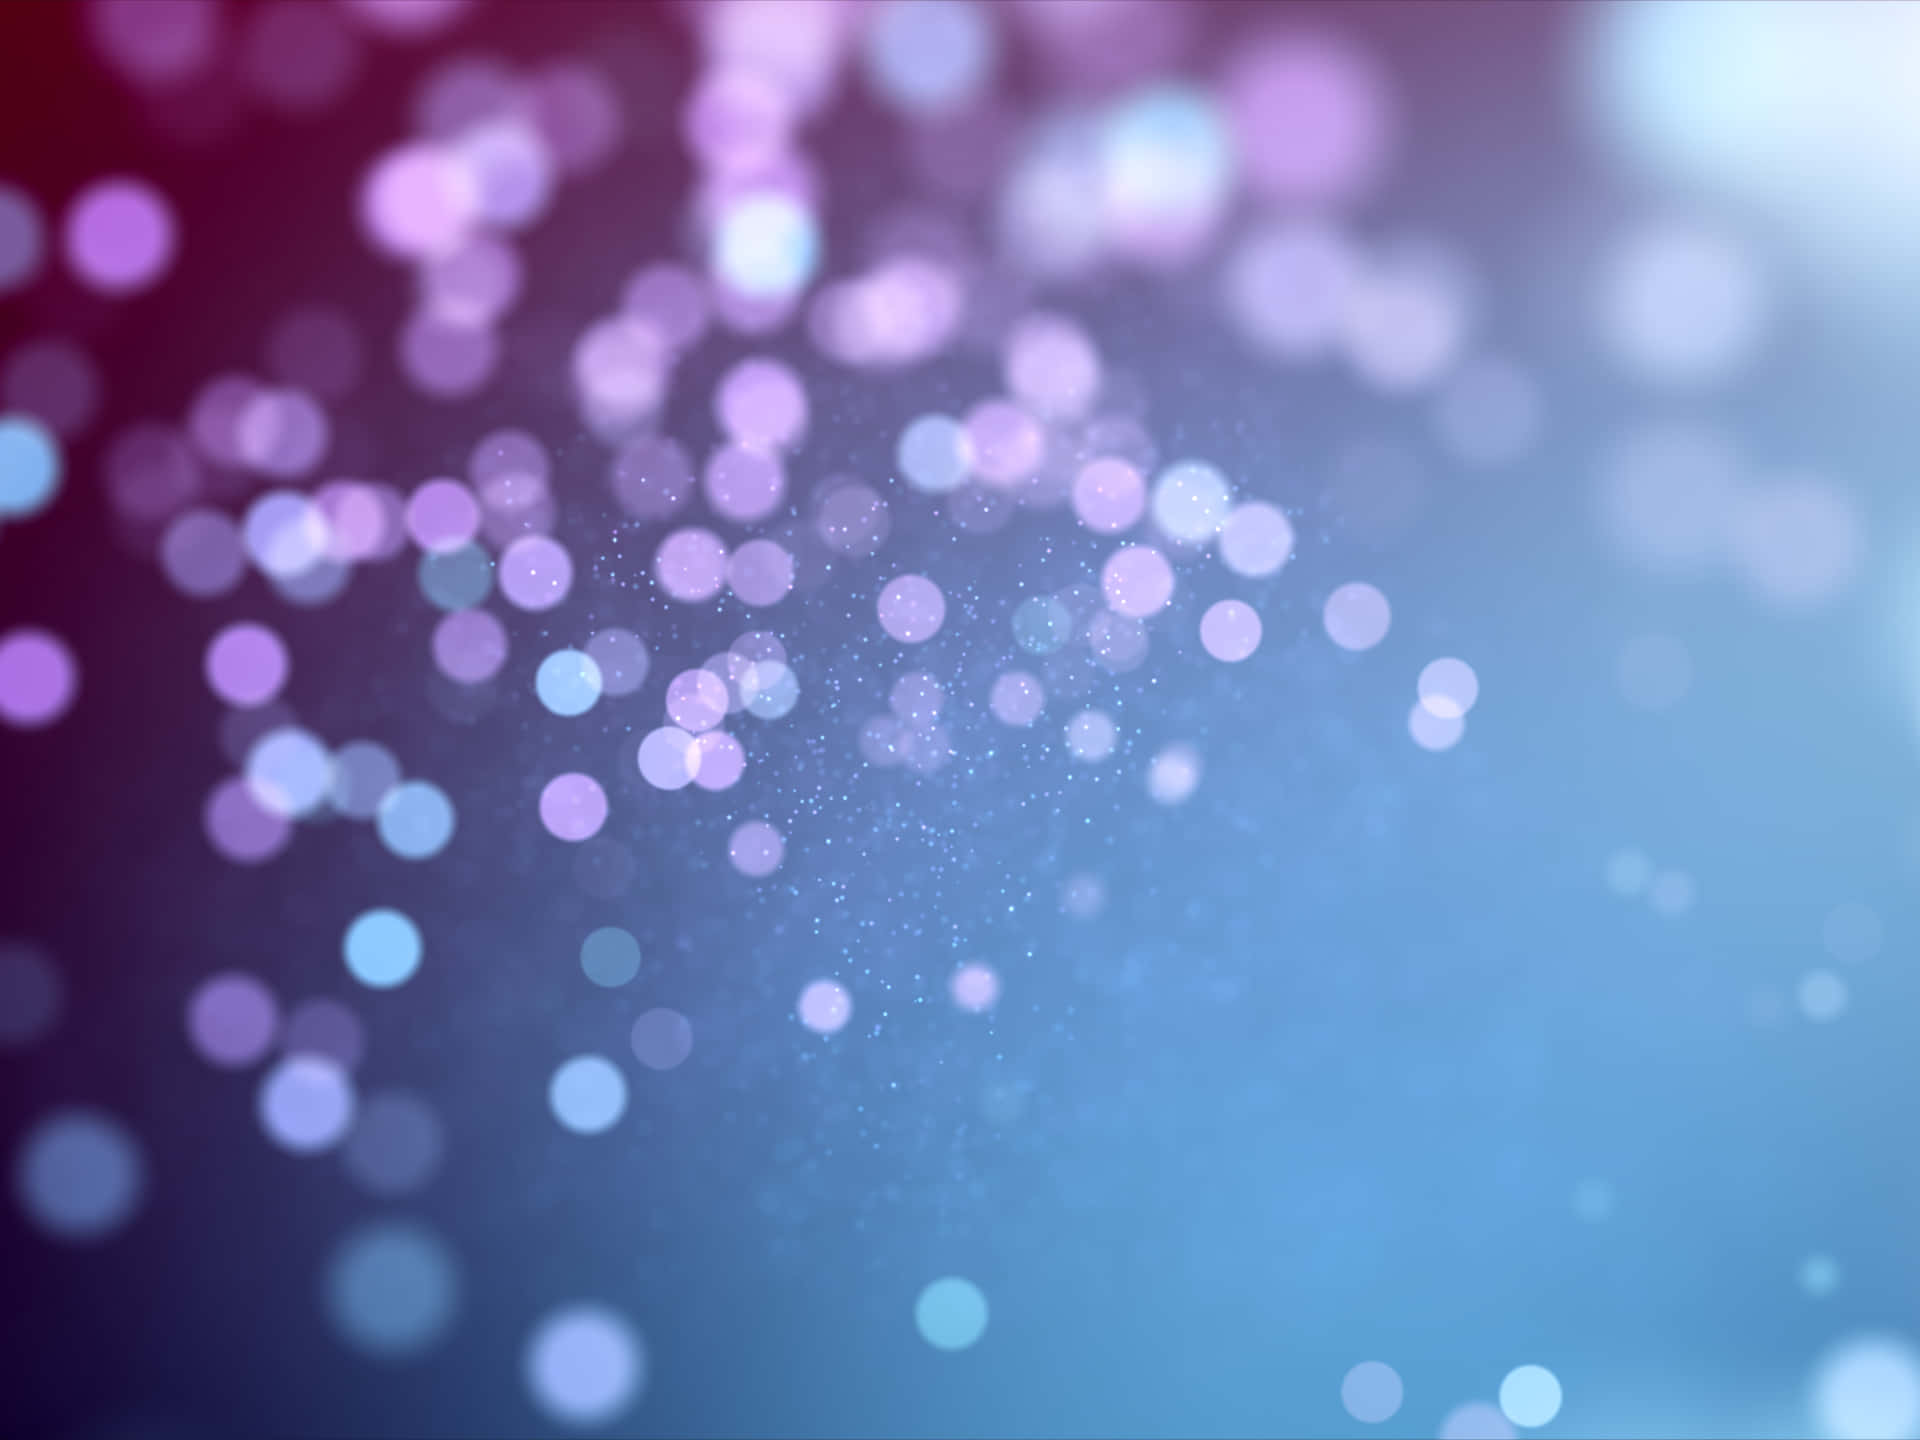 Blurry Background Light Blue And Purple Glitters 2048 x 1536 Background